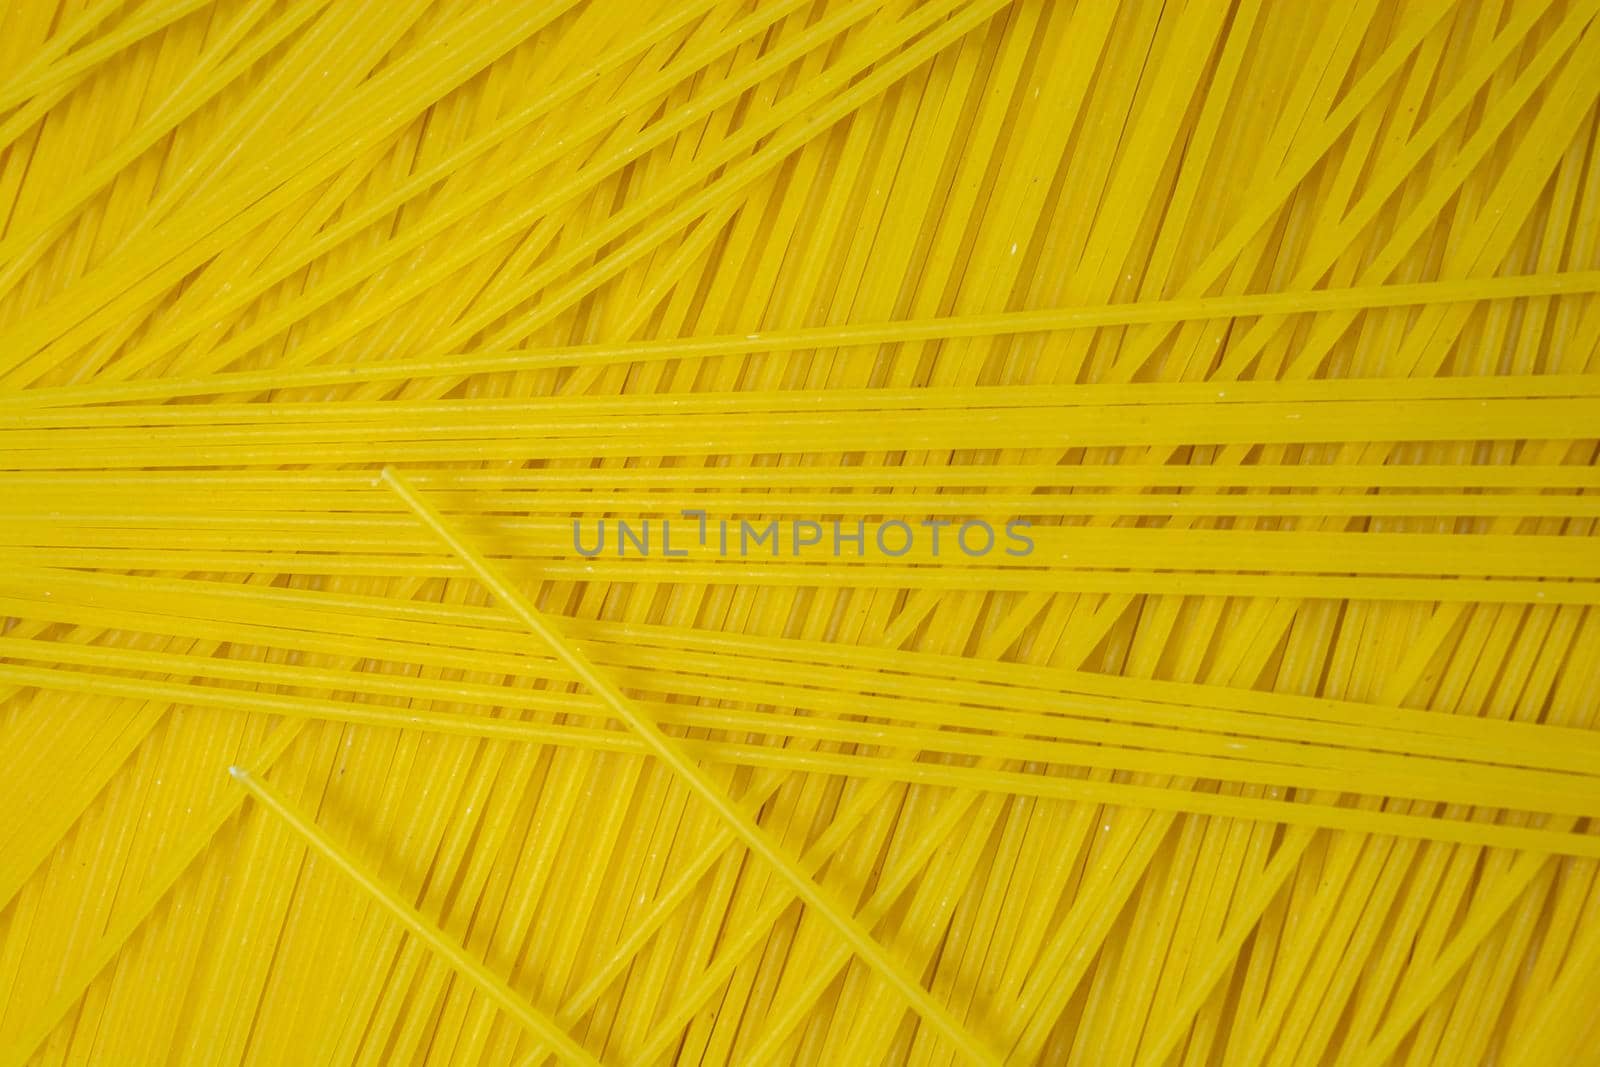 Abstract background of long and thin spaghetti. Raw pasta. Culinary theme.